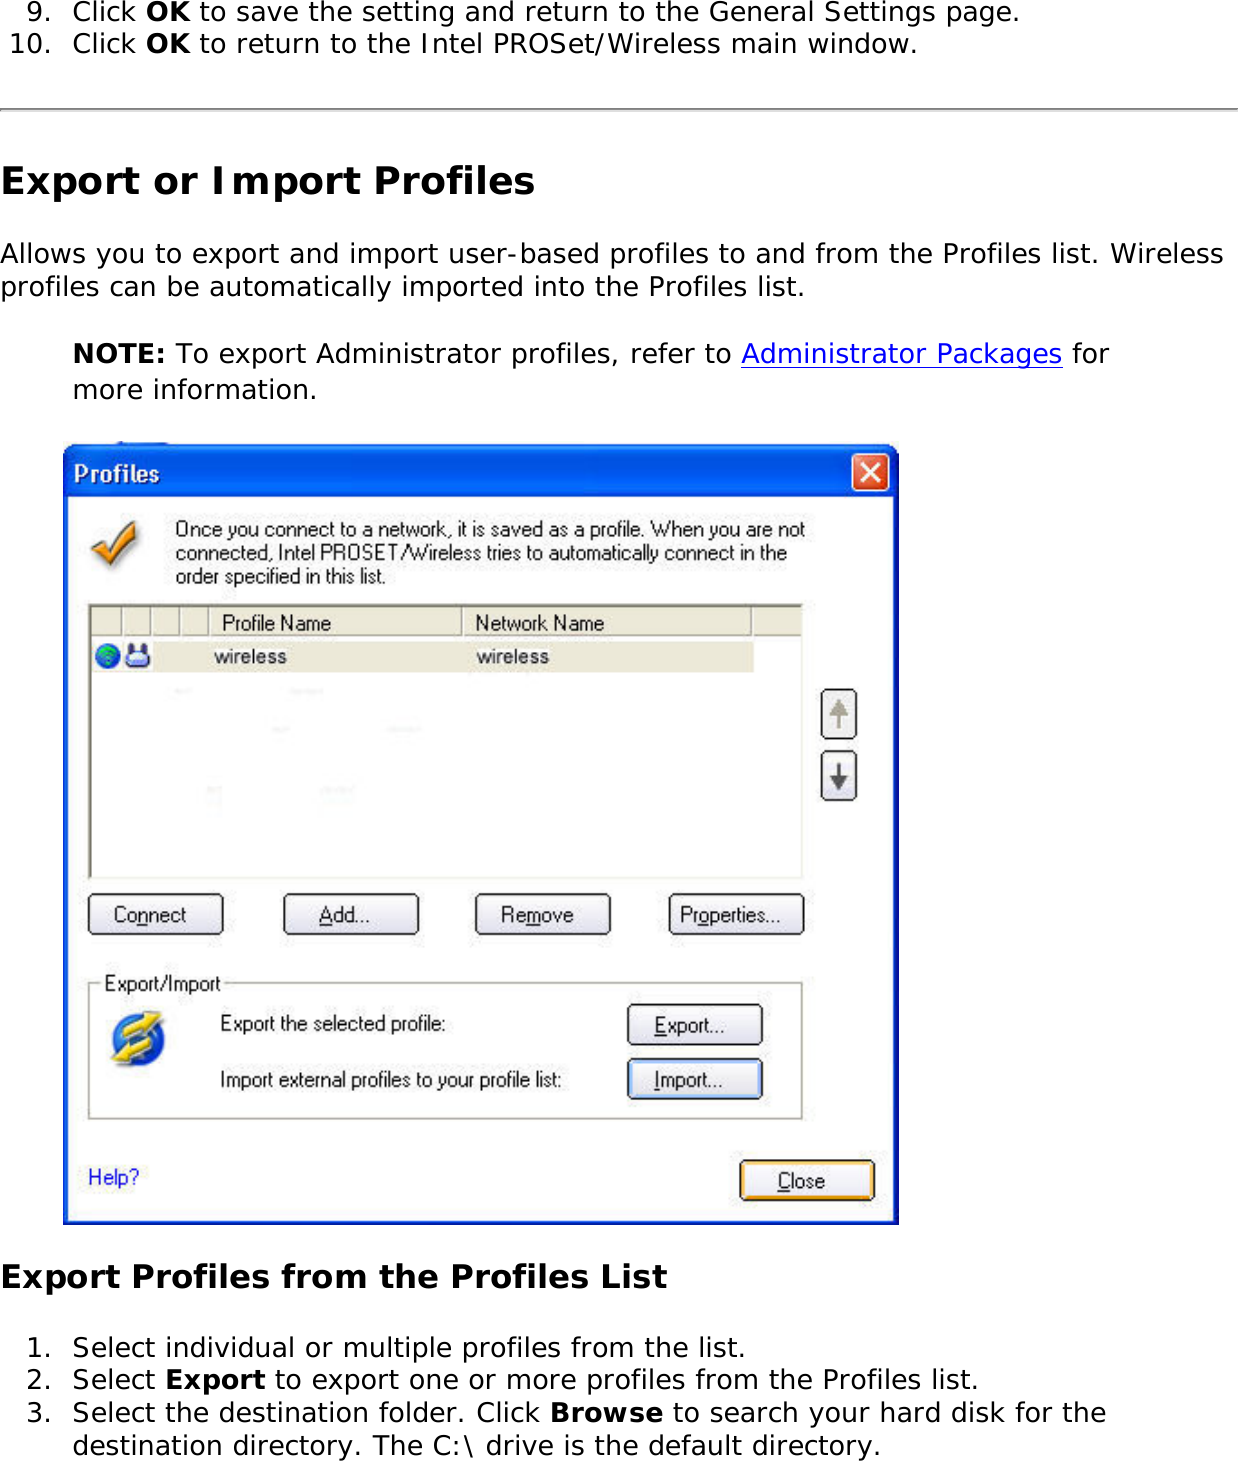 9.  Click OK to save the setting and return to the General Settings page.10.  Click OK to return to the Intel PROSet/Wireless main window. Export or Import Profiles Allows you to export and import user-based profiles to and from the Profiles list. Wireless profiles can be automatically imported into the Profiles list. NOTE: To export Administrator profiles, refer to Administrator Packages for more information. Export Profiles from the Profiles List1.  Select individual or multiple profiles from the list. 2.  Select Export to export one or more profiles from the Profiles list.3.  Select the destination folder. Click Browse to search your hard disk for the destination directory. The C:\ drive is the default directory. 